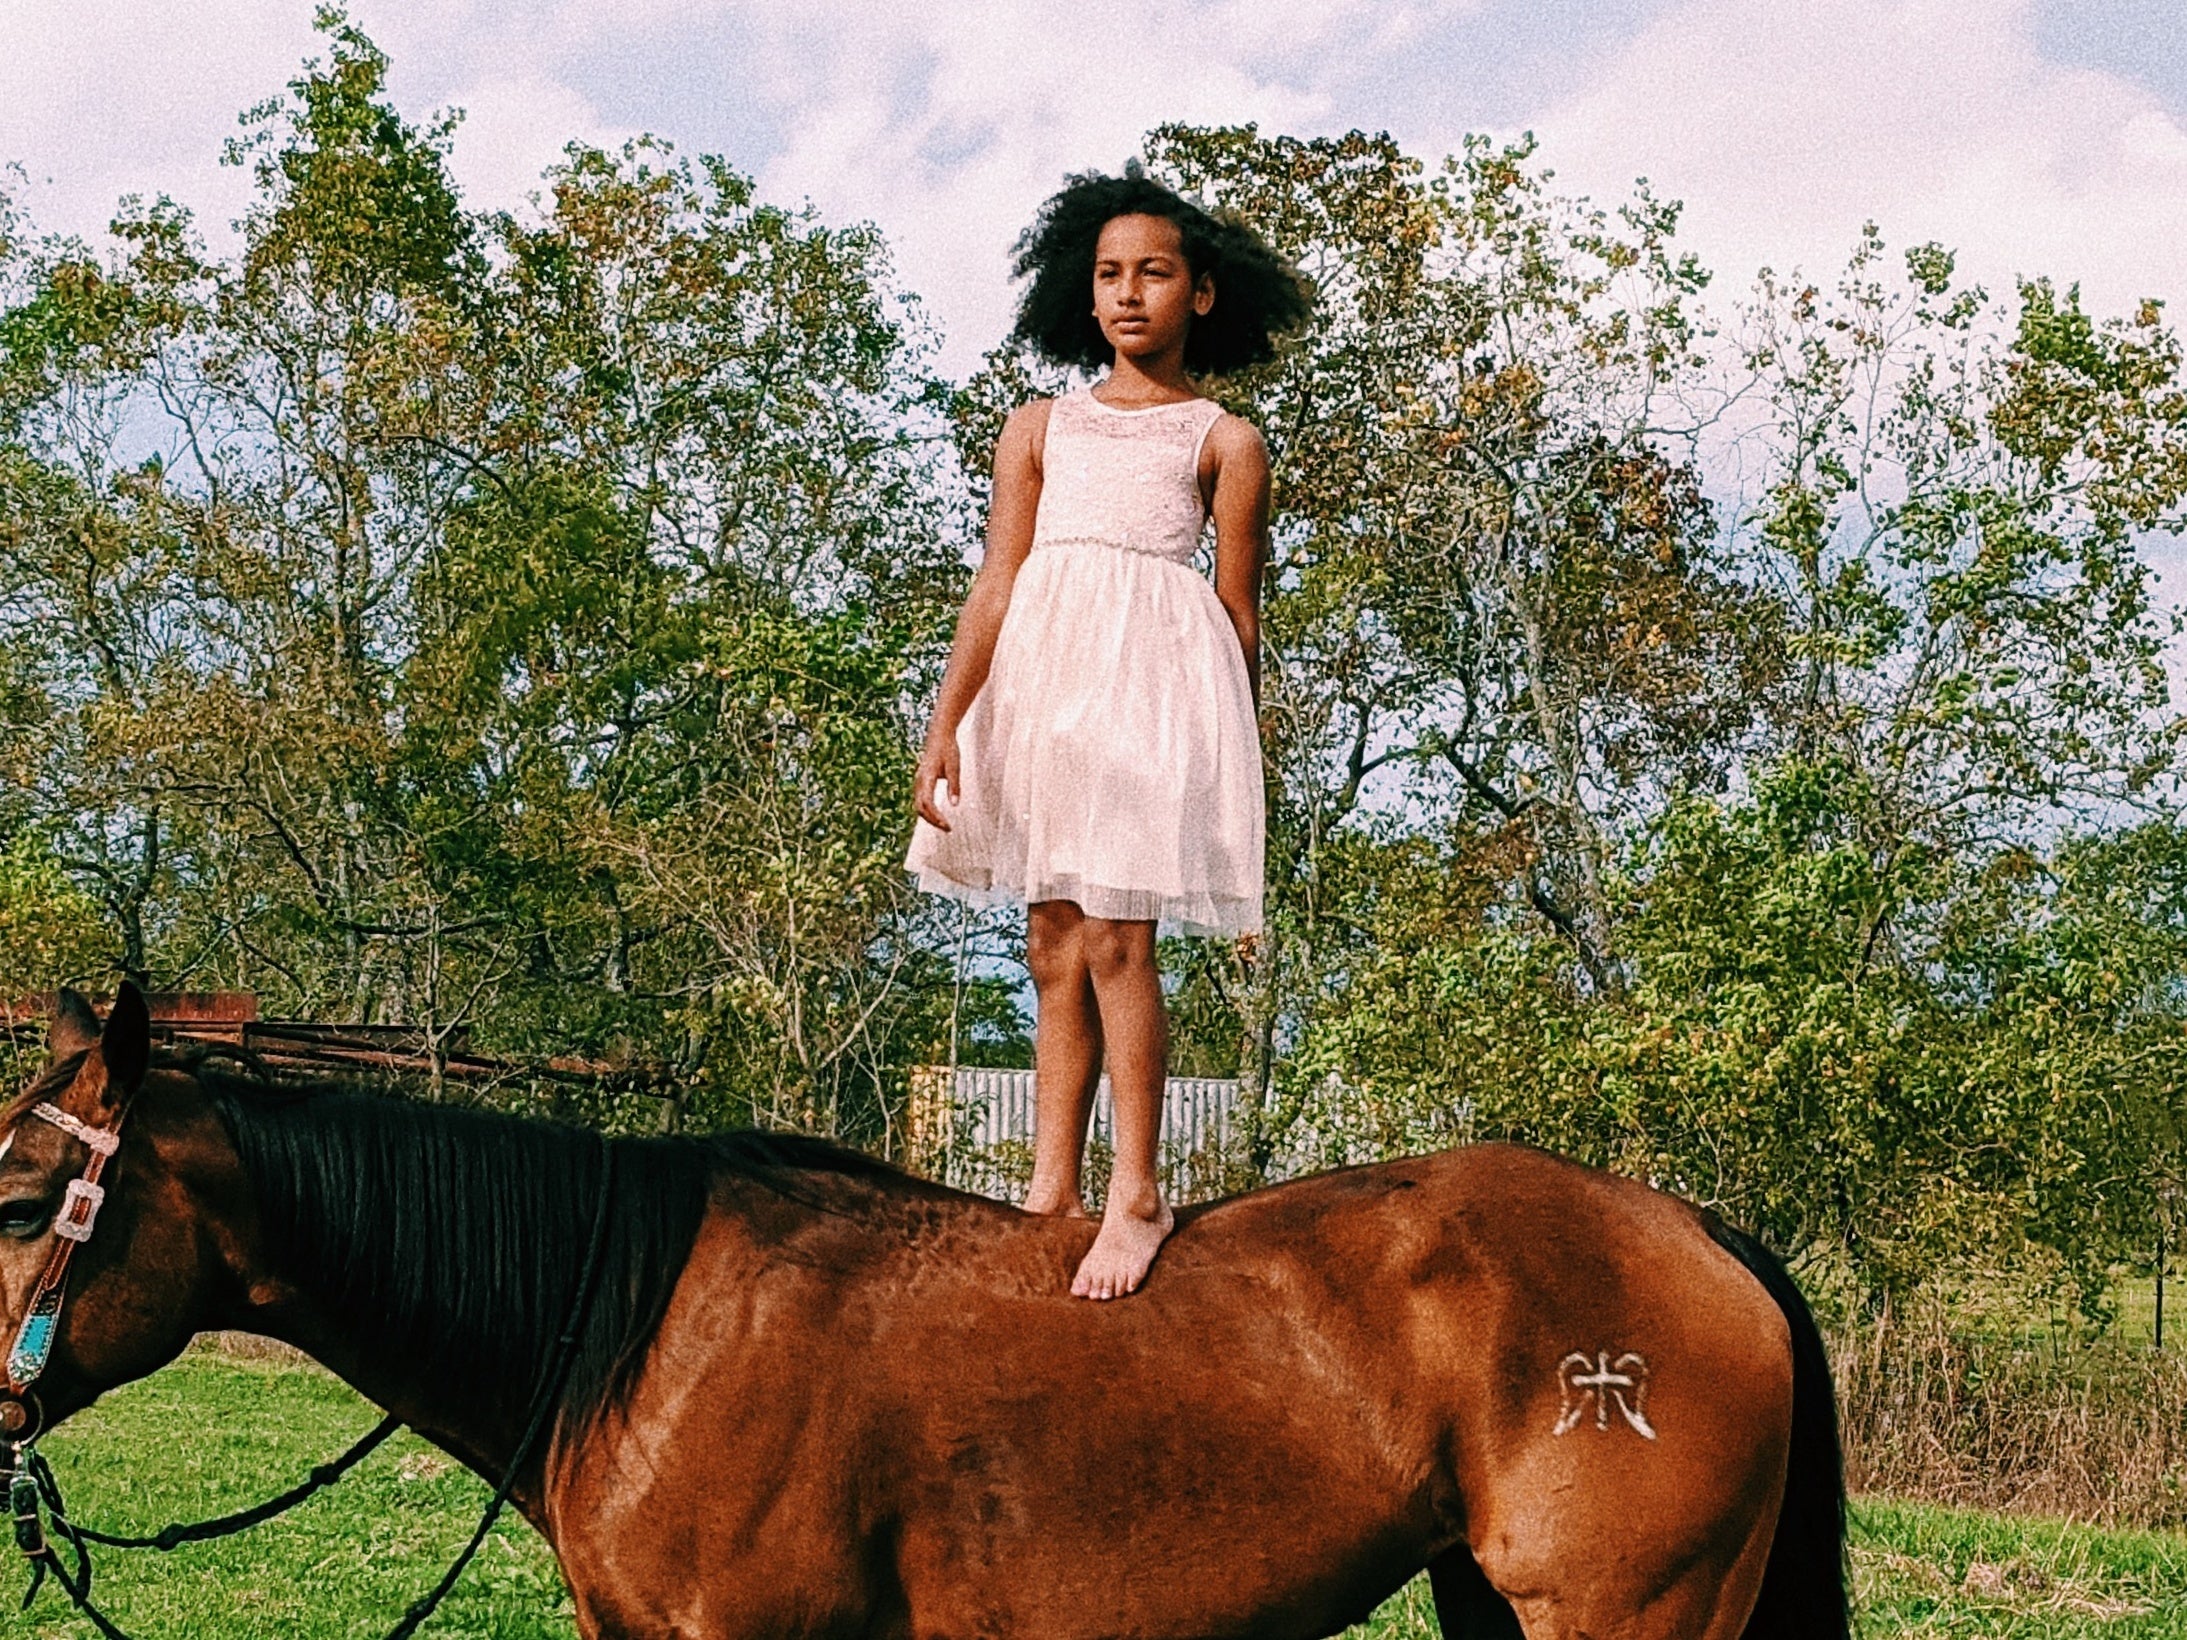 Photographer Kennedi Carter Partners With Google Creator Labs